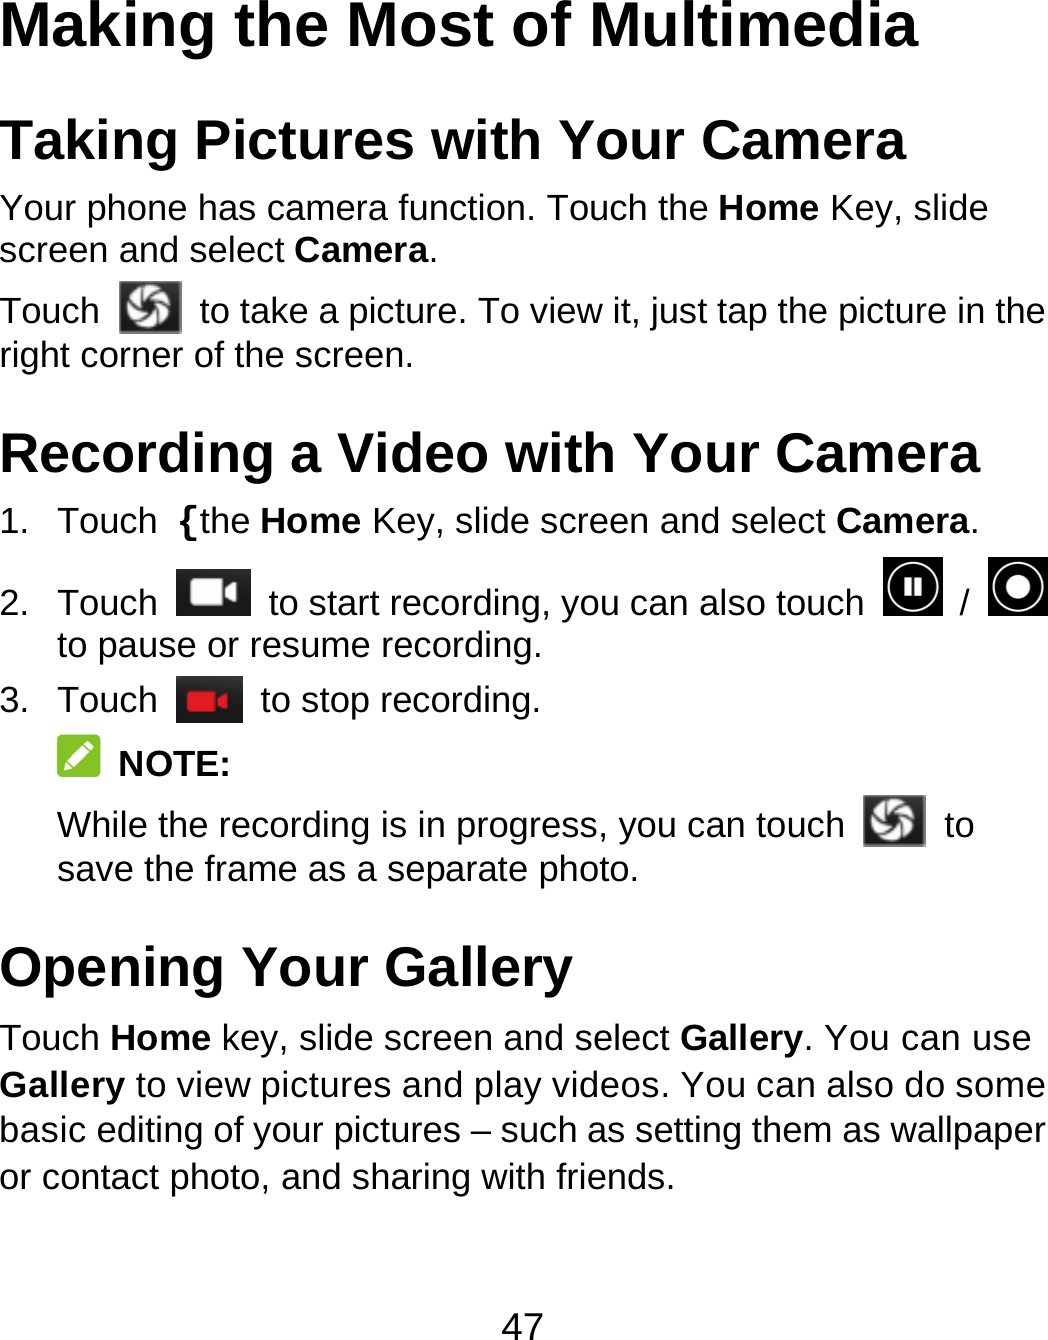 47 Making the Most of Multimedia Taking Pictures with Your Camera Your phone has camera function. Touch the Home Key, slide screen and select Camera. Touch   to take a picture. To view it, just tap the picture in the right corner of the screen. Recording a Video with Your Camera 1. Touch {the Home Key, slide screen and select Camera. 2. Touch   to start recording, you can also touch   /   to pause or resume recording. 3. Touch   to stop recording.  NOTE: While the recording is in progress, you can touch   to save the frame as a separate photo. Opening Your Gallery Touch Home key, slide screen and select Gallery. You can use Gallery to view pictures and play videos. You can also do some basic editing of your pictures – such as setting them as wallpaper or contact photo, and sharing with friends. 